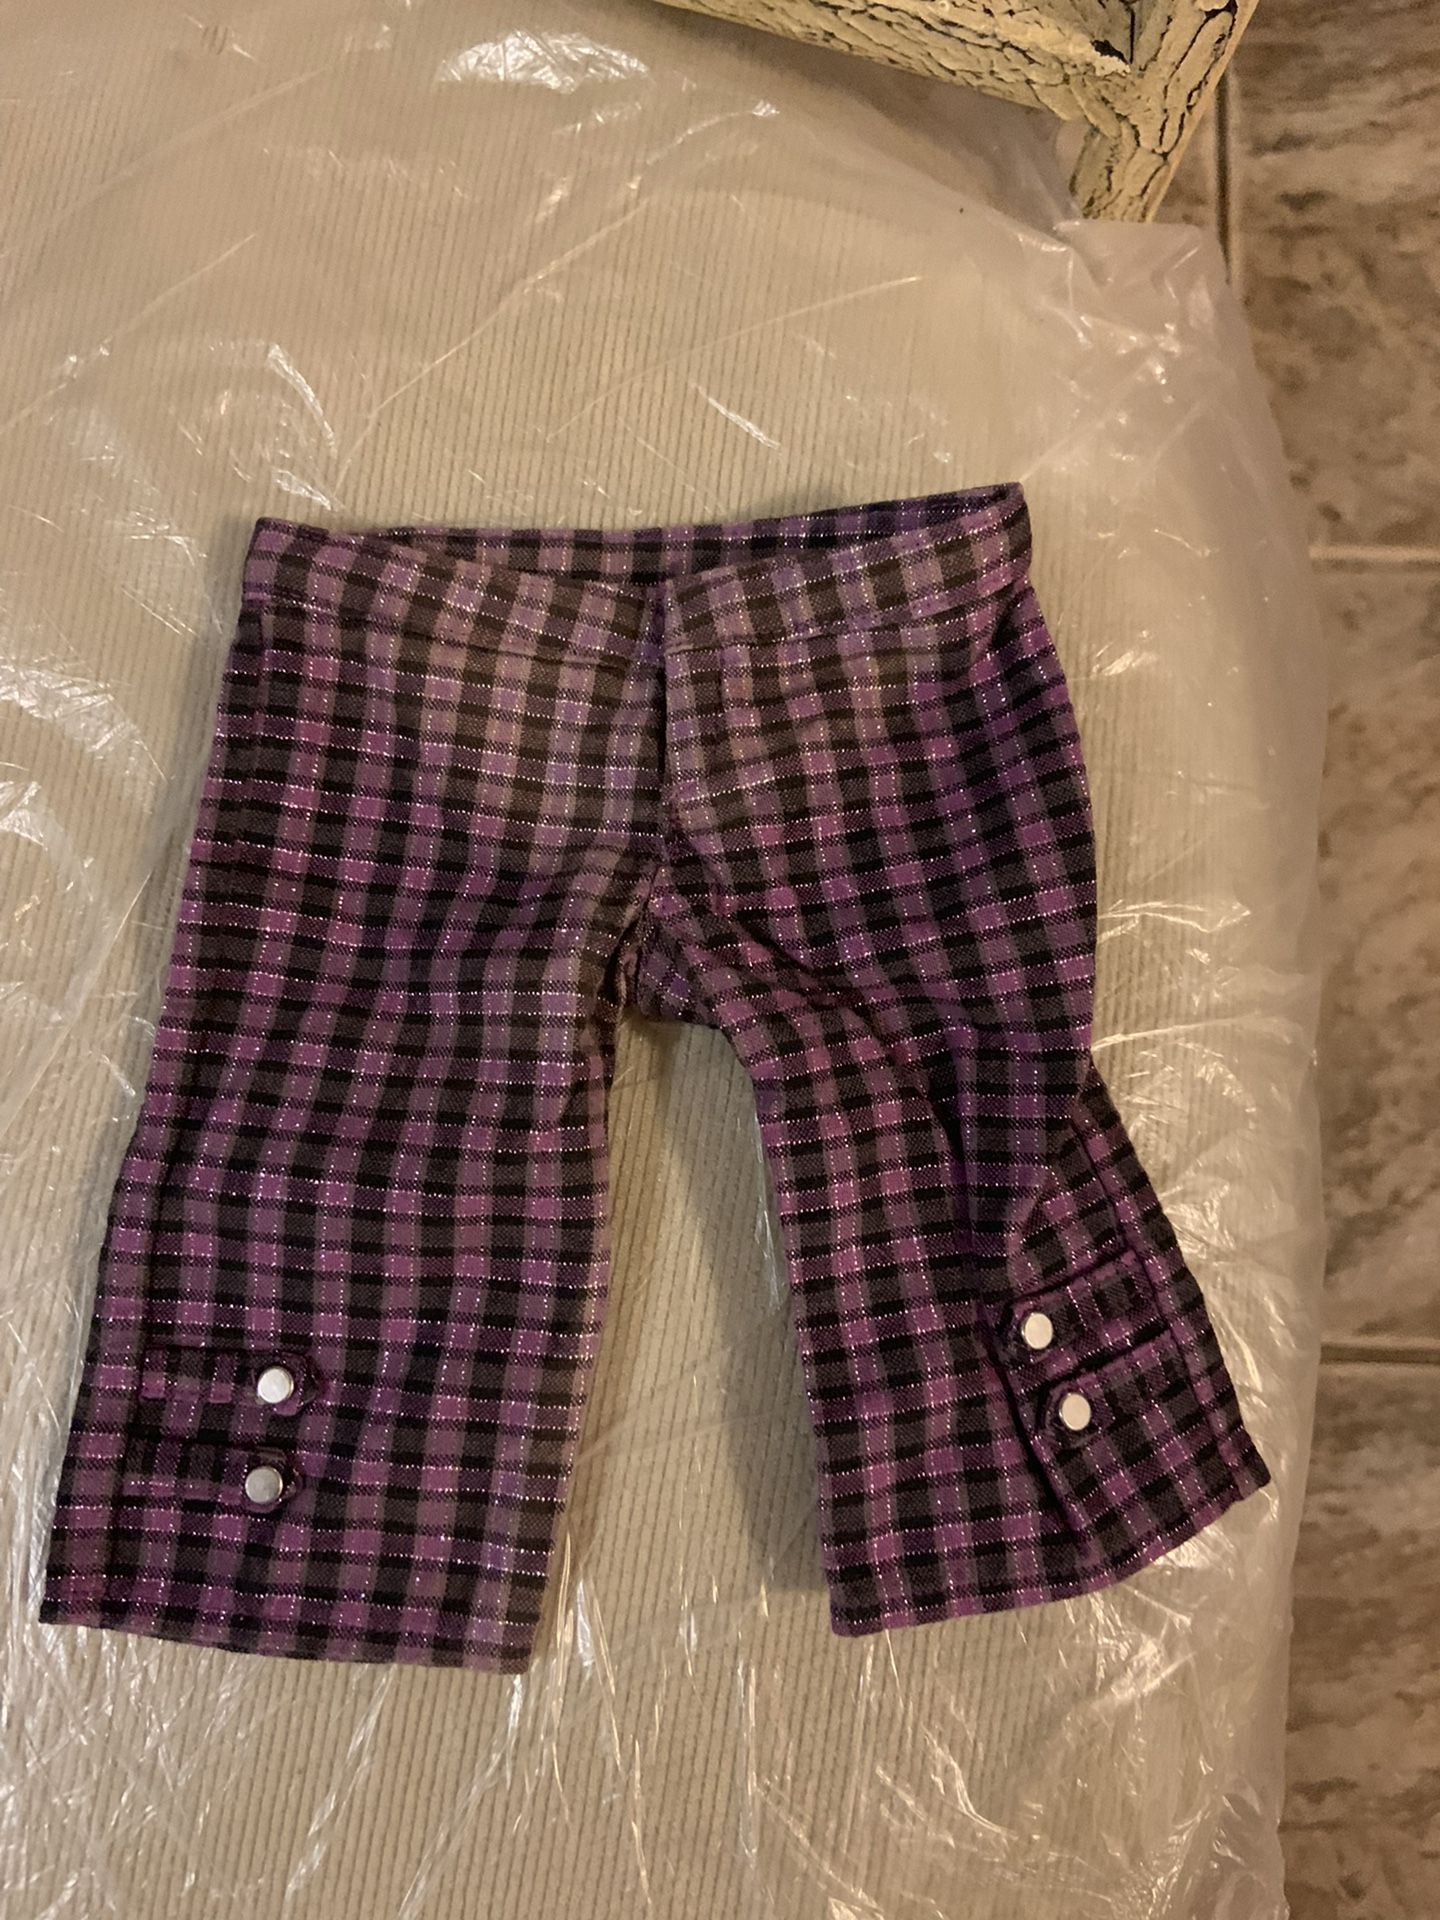 American Girl Retired Pant Only From The Singing Star Outifi For 18” Doll